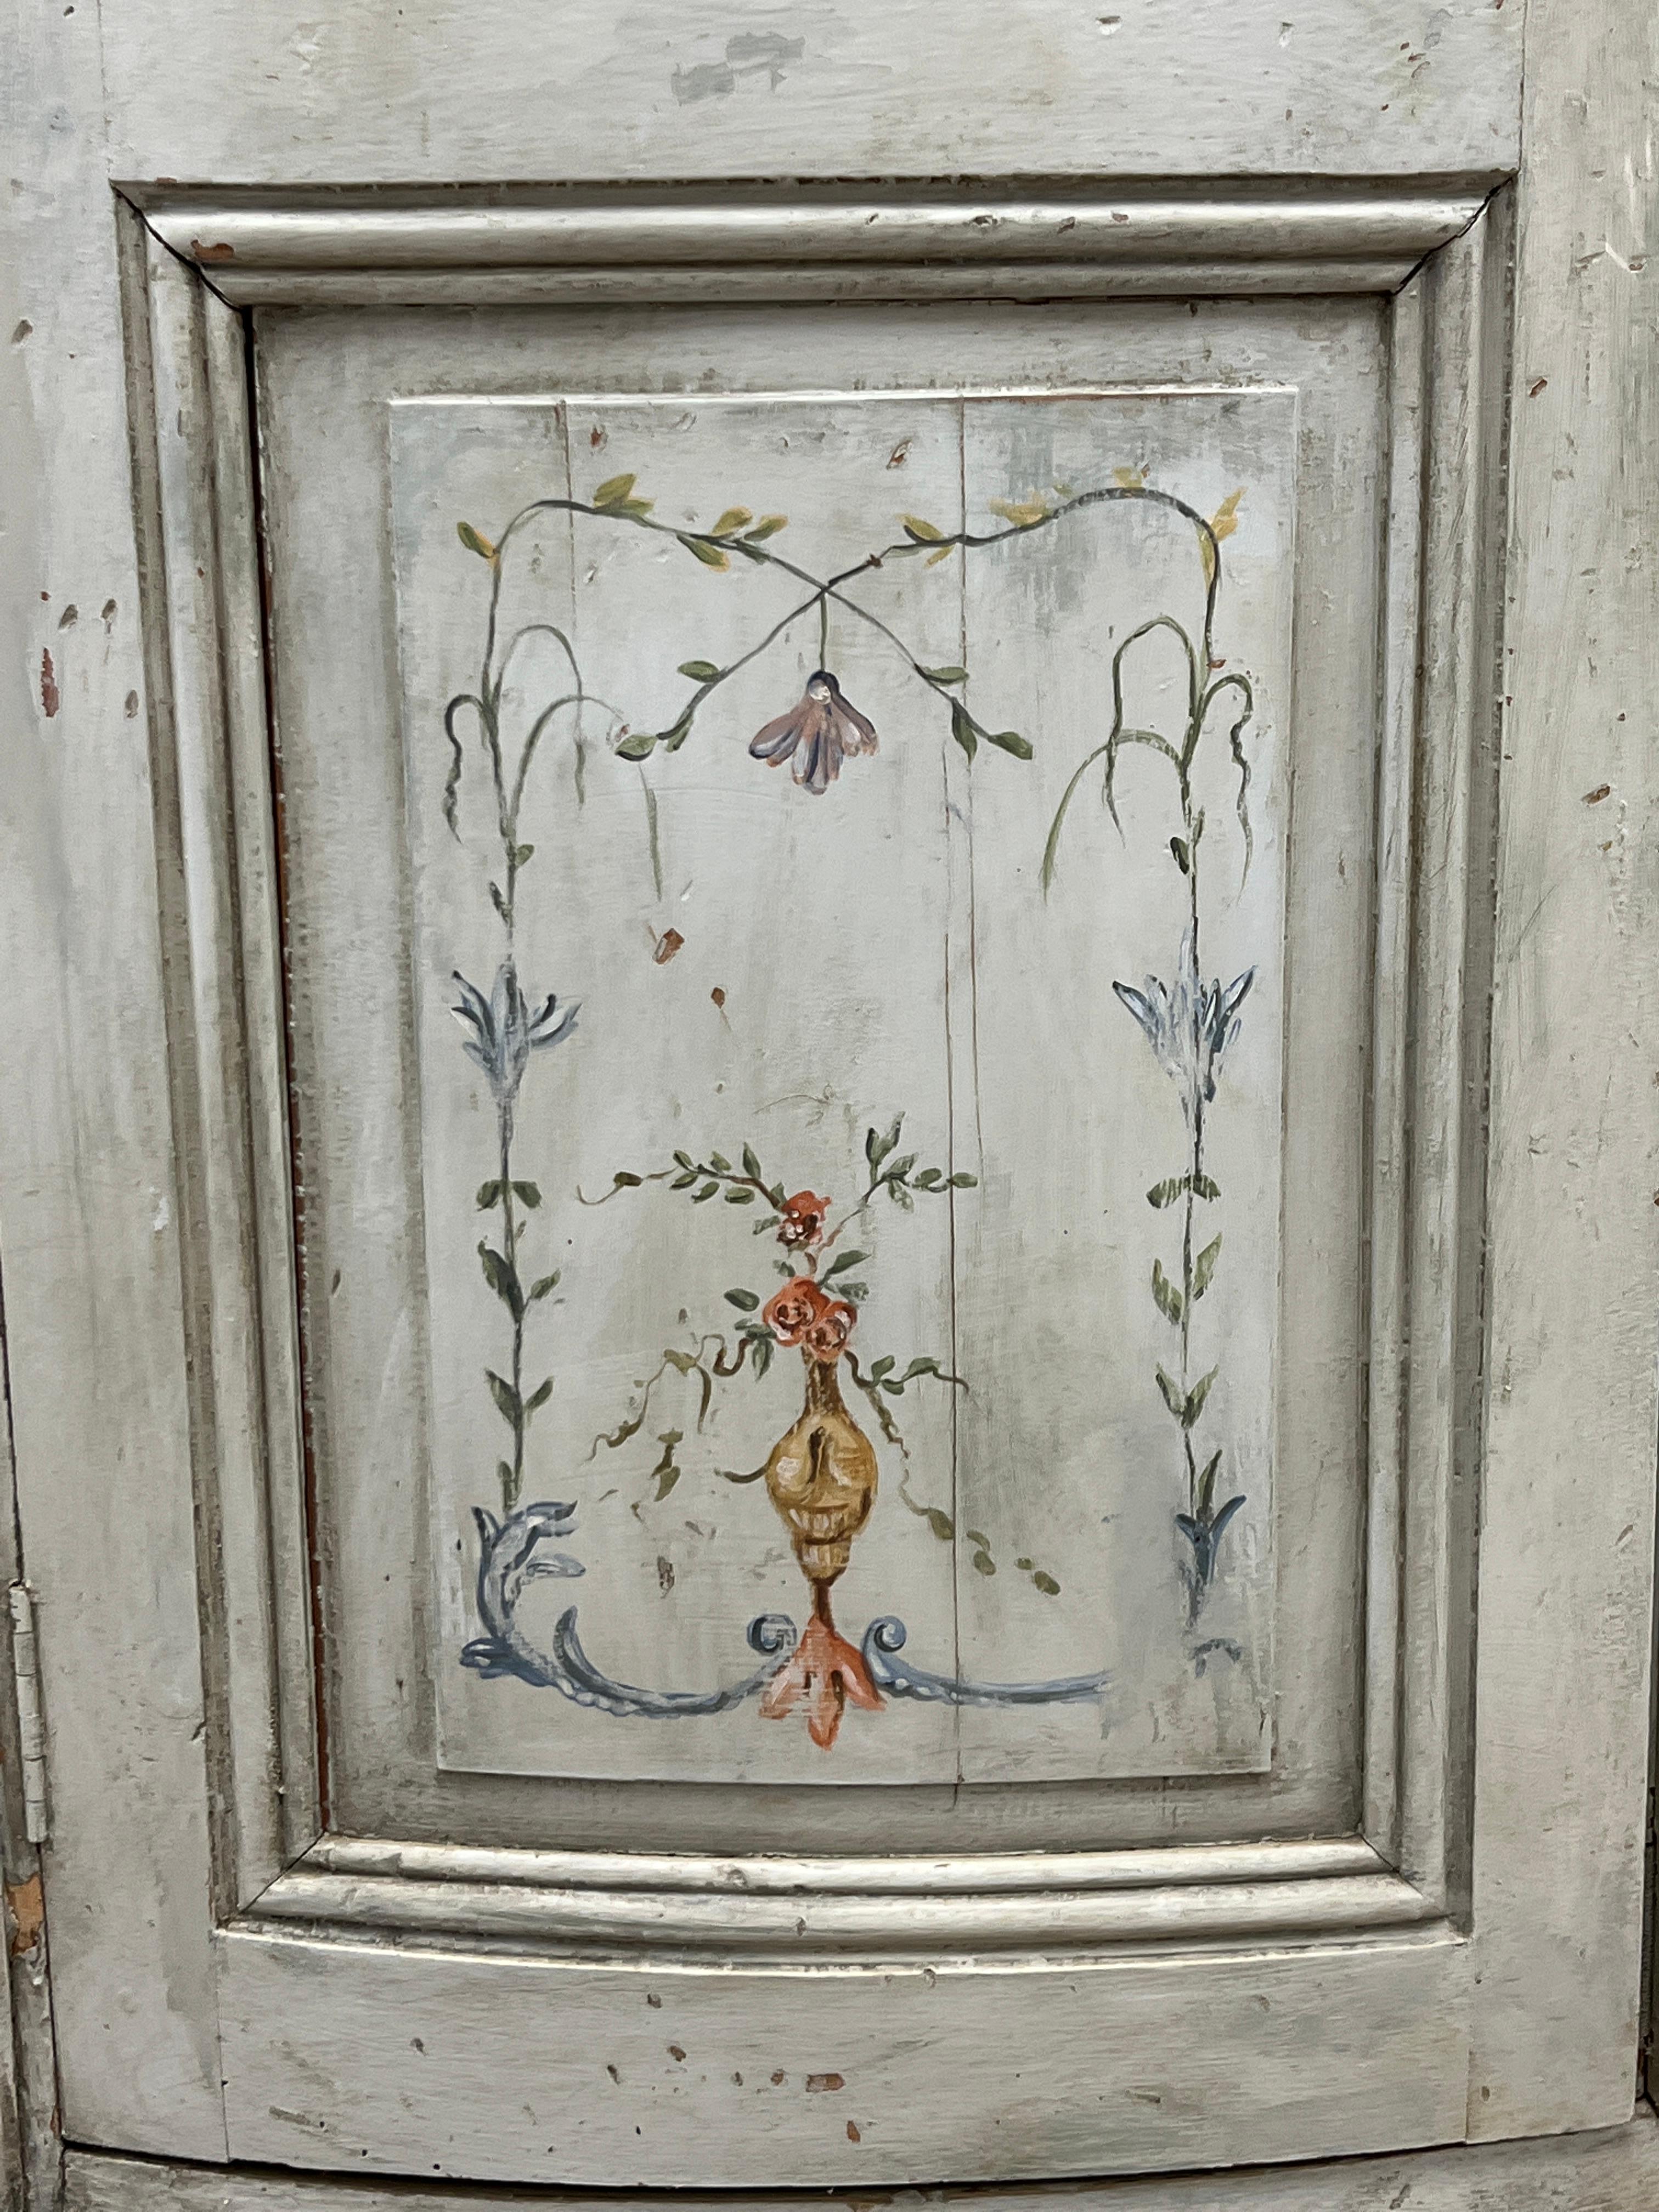 Featuring a charming French hand-painted bow front corner cupboard in the Gustavian style. The right door has an operational fitted key that operates. There is a small spring latch on the interior of the left door. The exterior door panels are